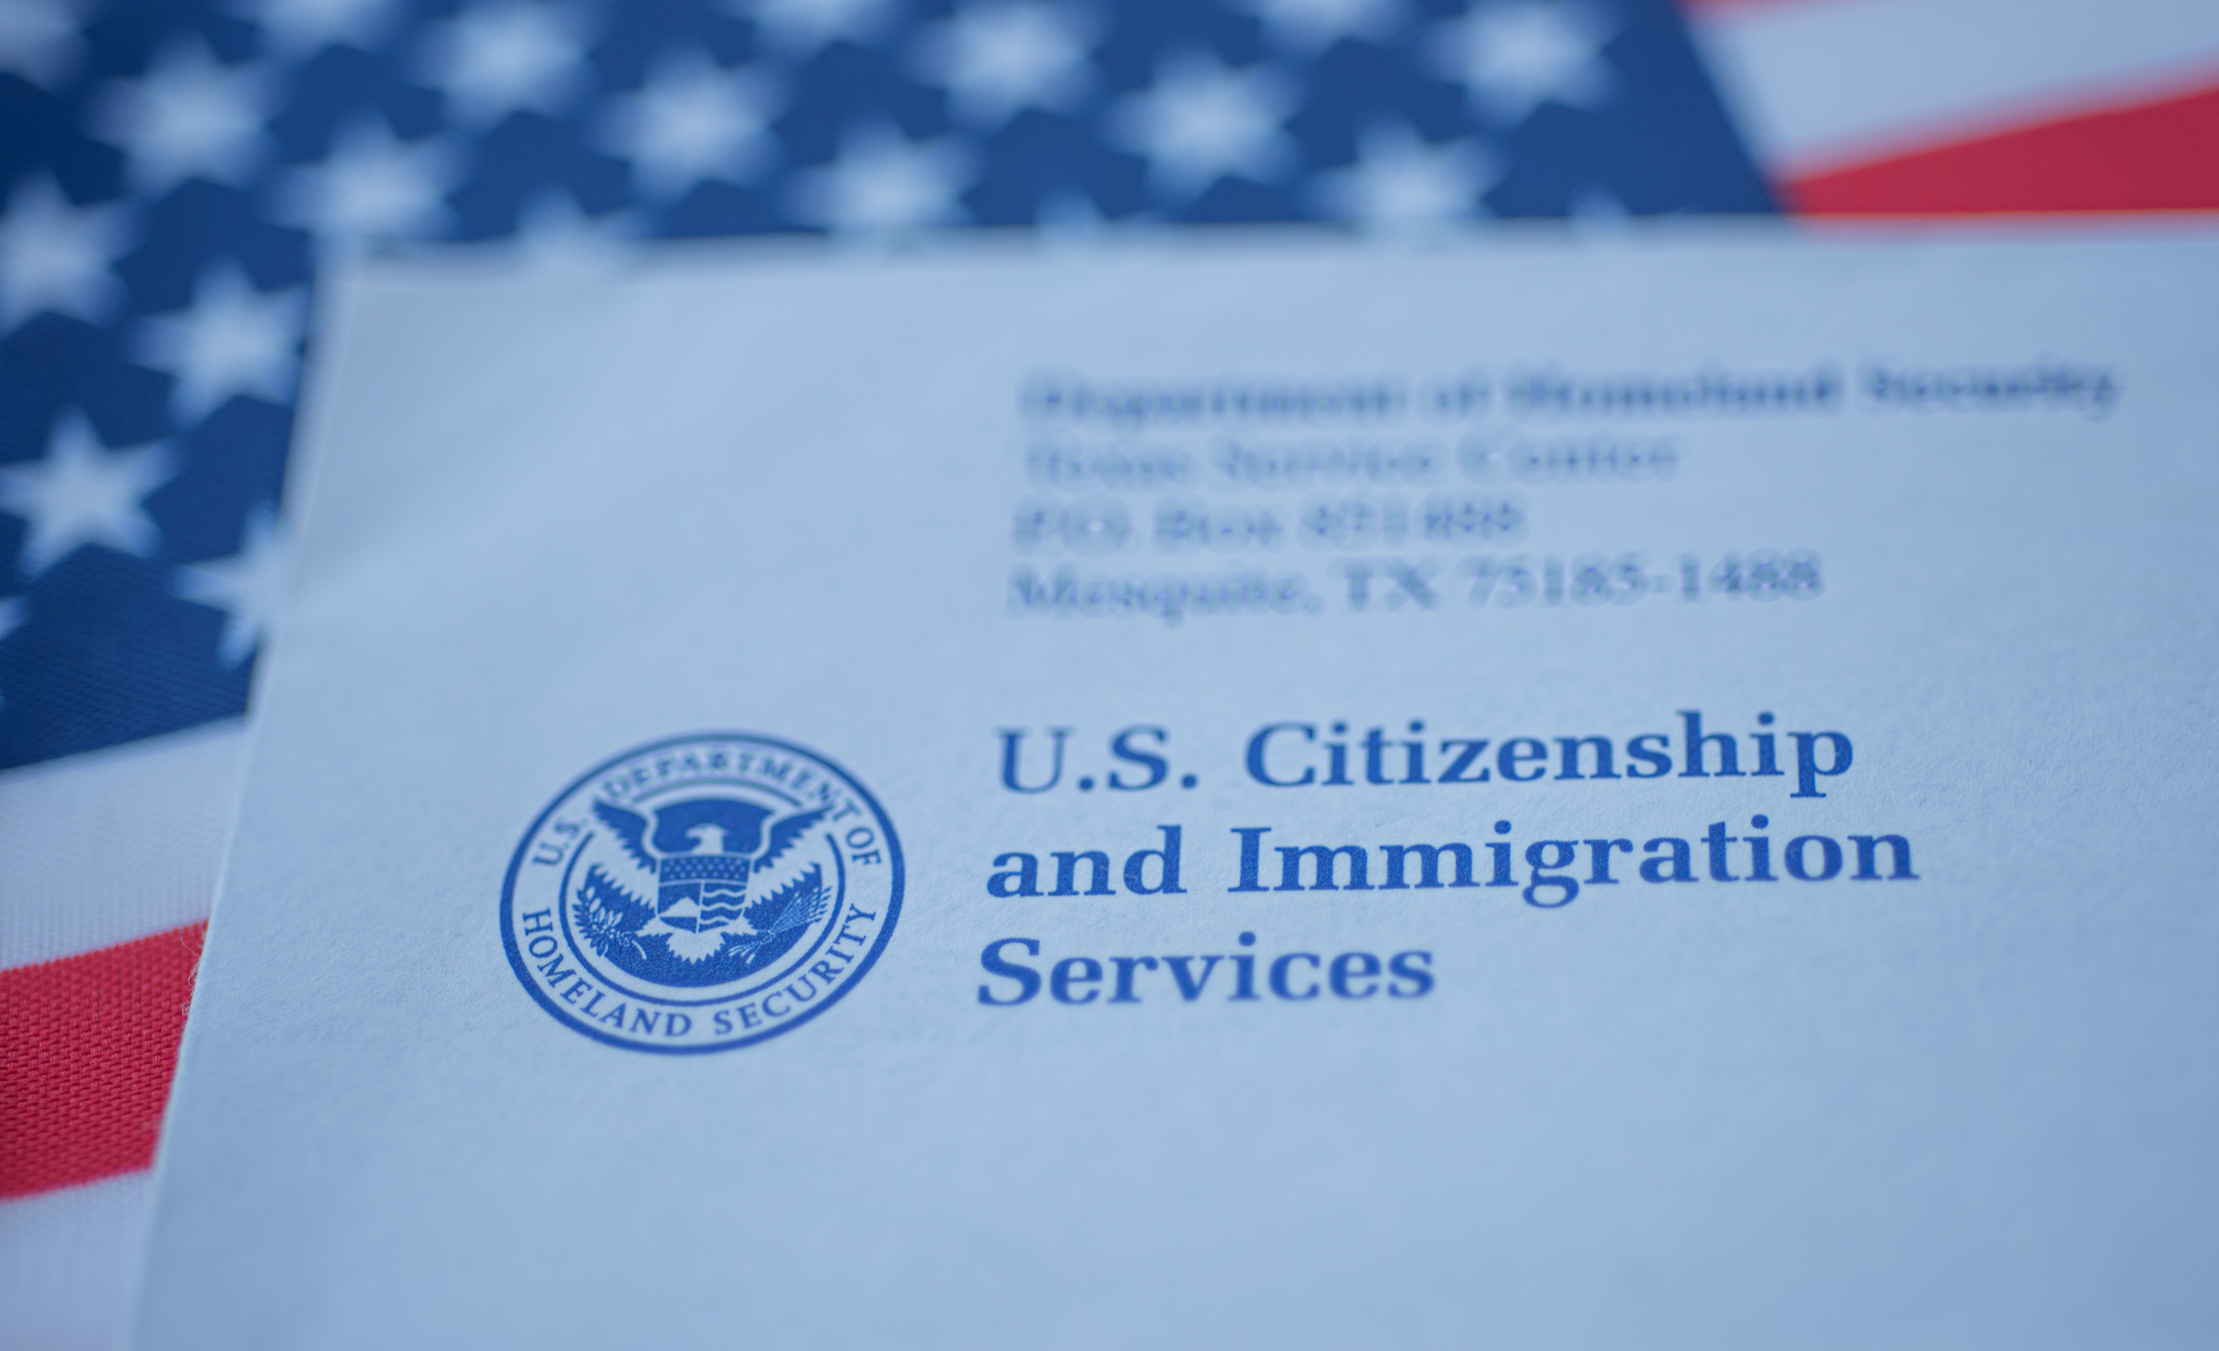 Close-up of a U.S. Citizenship and Immigration Services document with a blurred American flag in the background